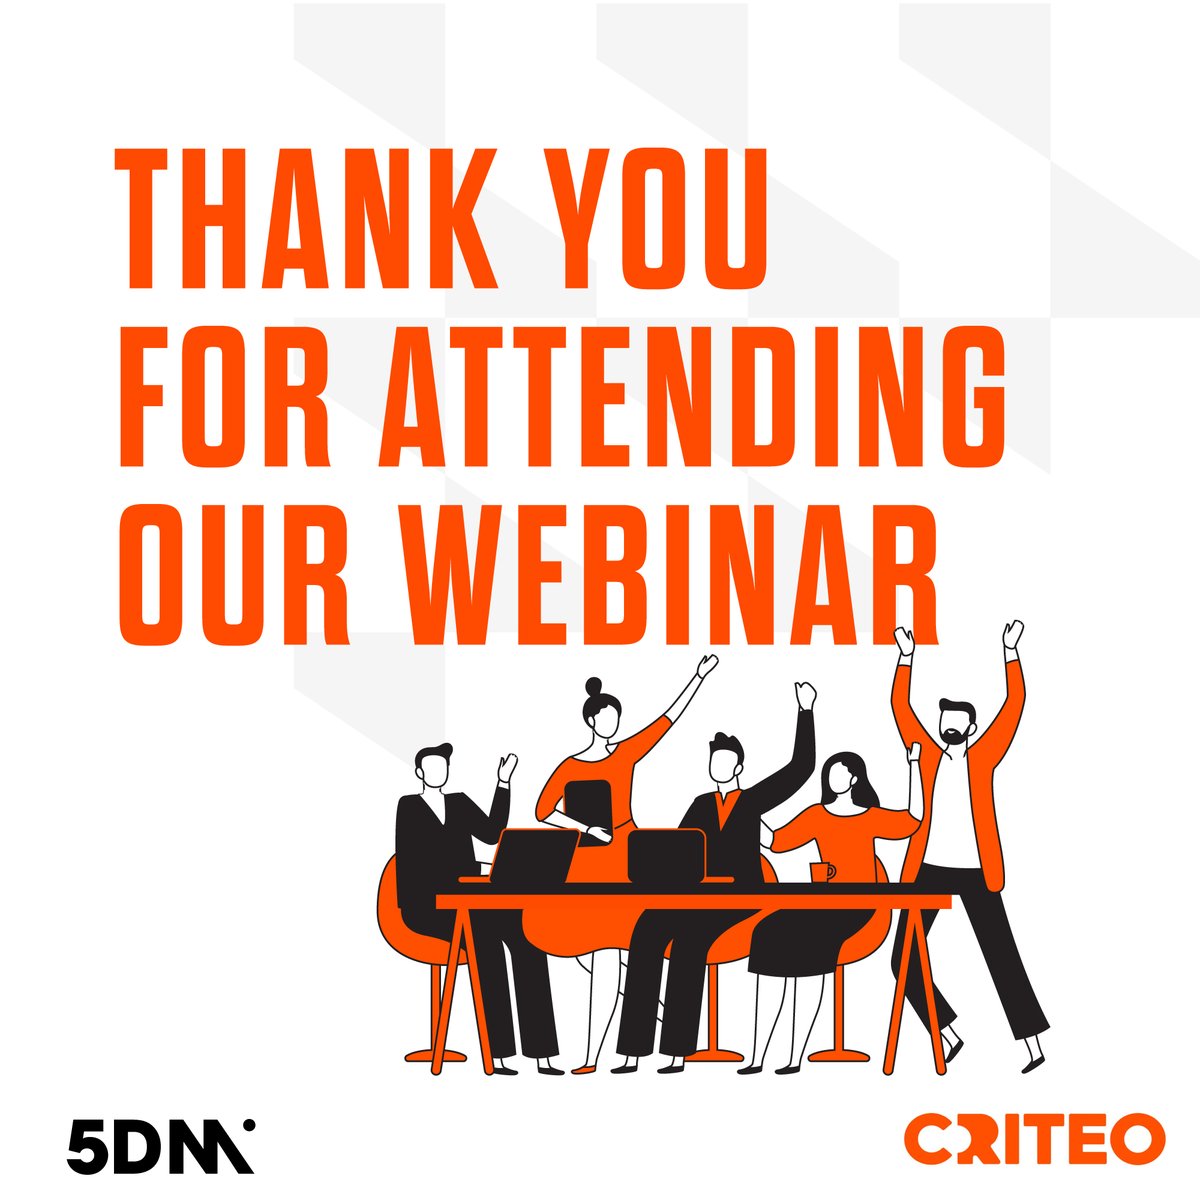 Thank you all for joining our Amplify Your E-commerce webinar hosted by @criteo . We appreciate each of you for making it an engaging & insightful session. Stay tuned for more opportunities to boost your marketing strategies. #5DM #Criteo #Ecommerce